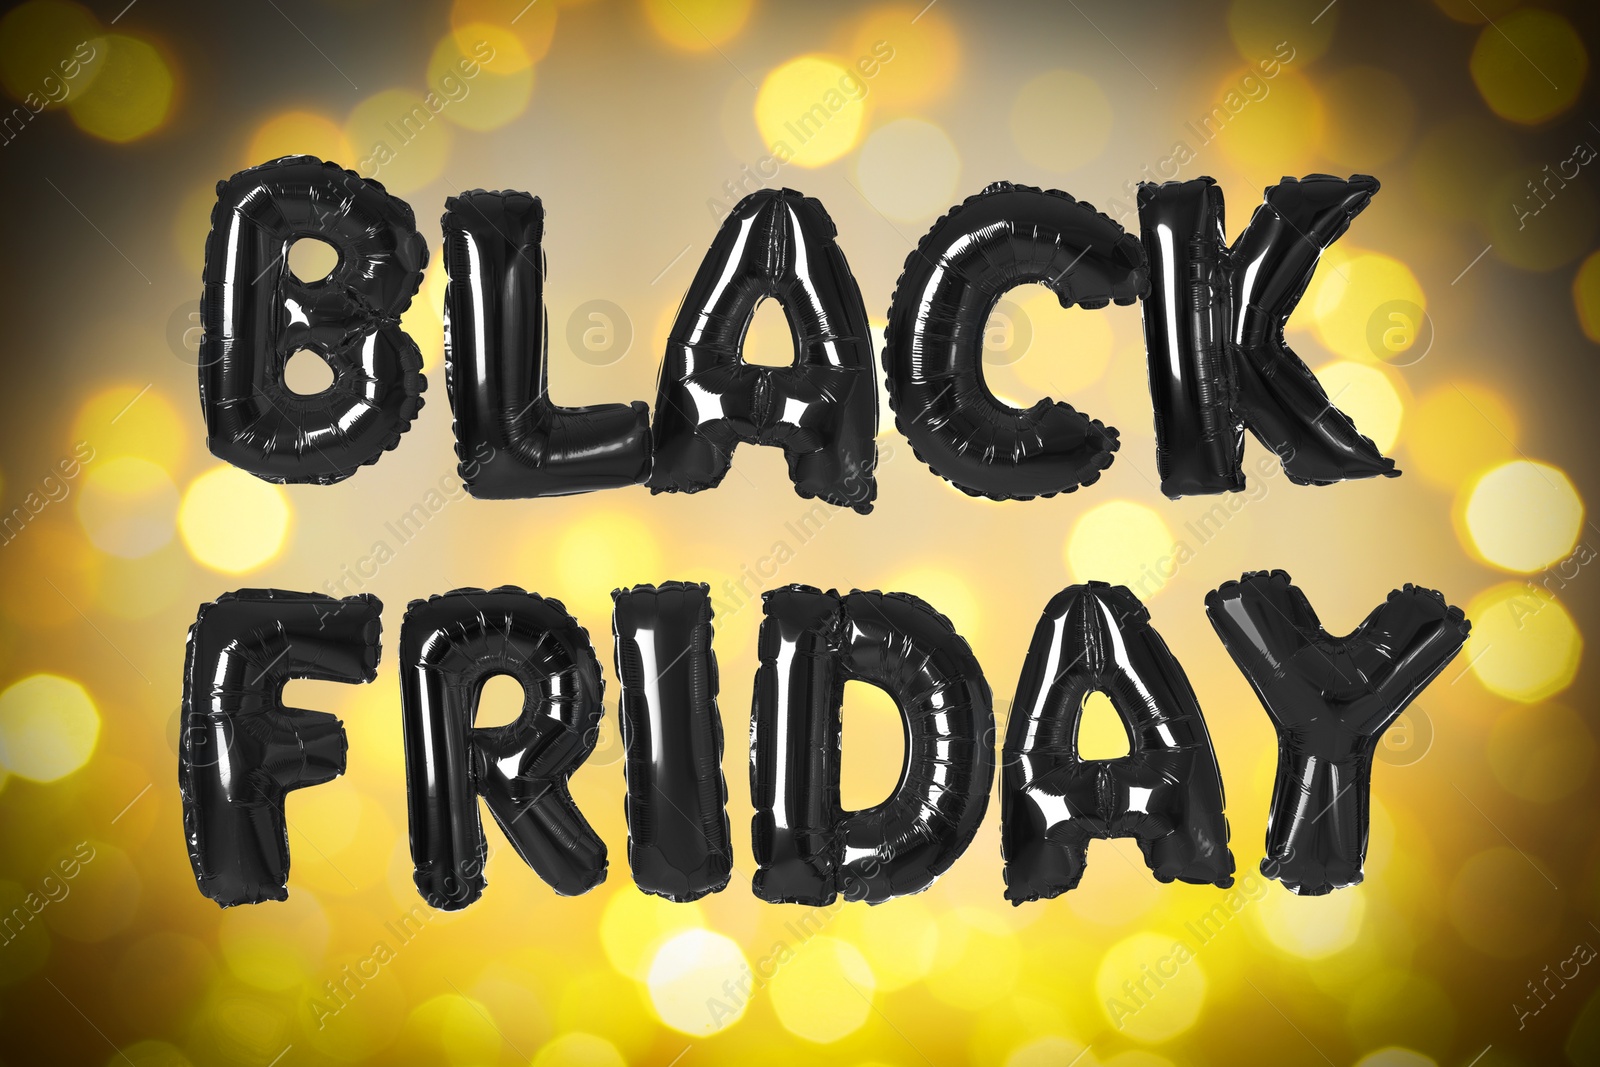 Image of Phrase BLACK FRIDAY made of foil balloon letters and blurred lights on background